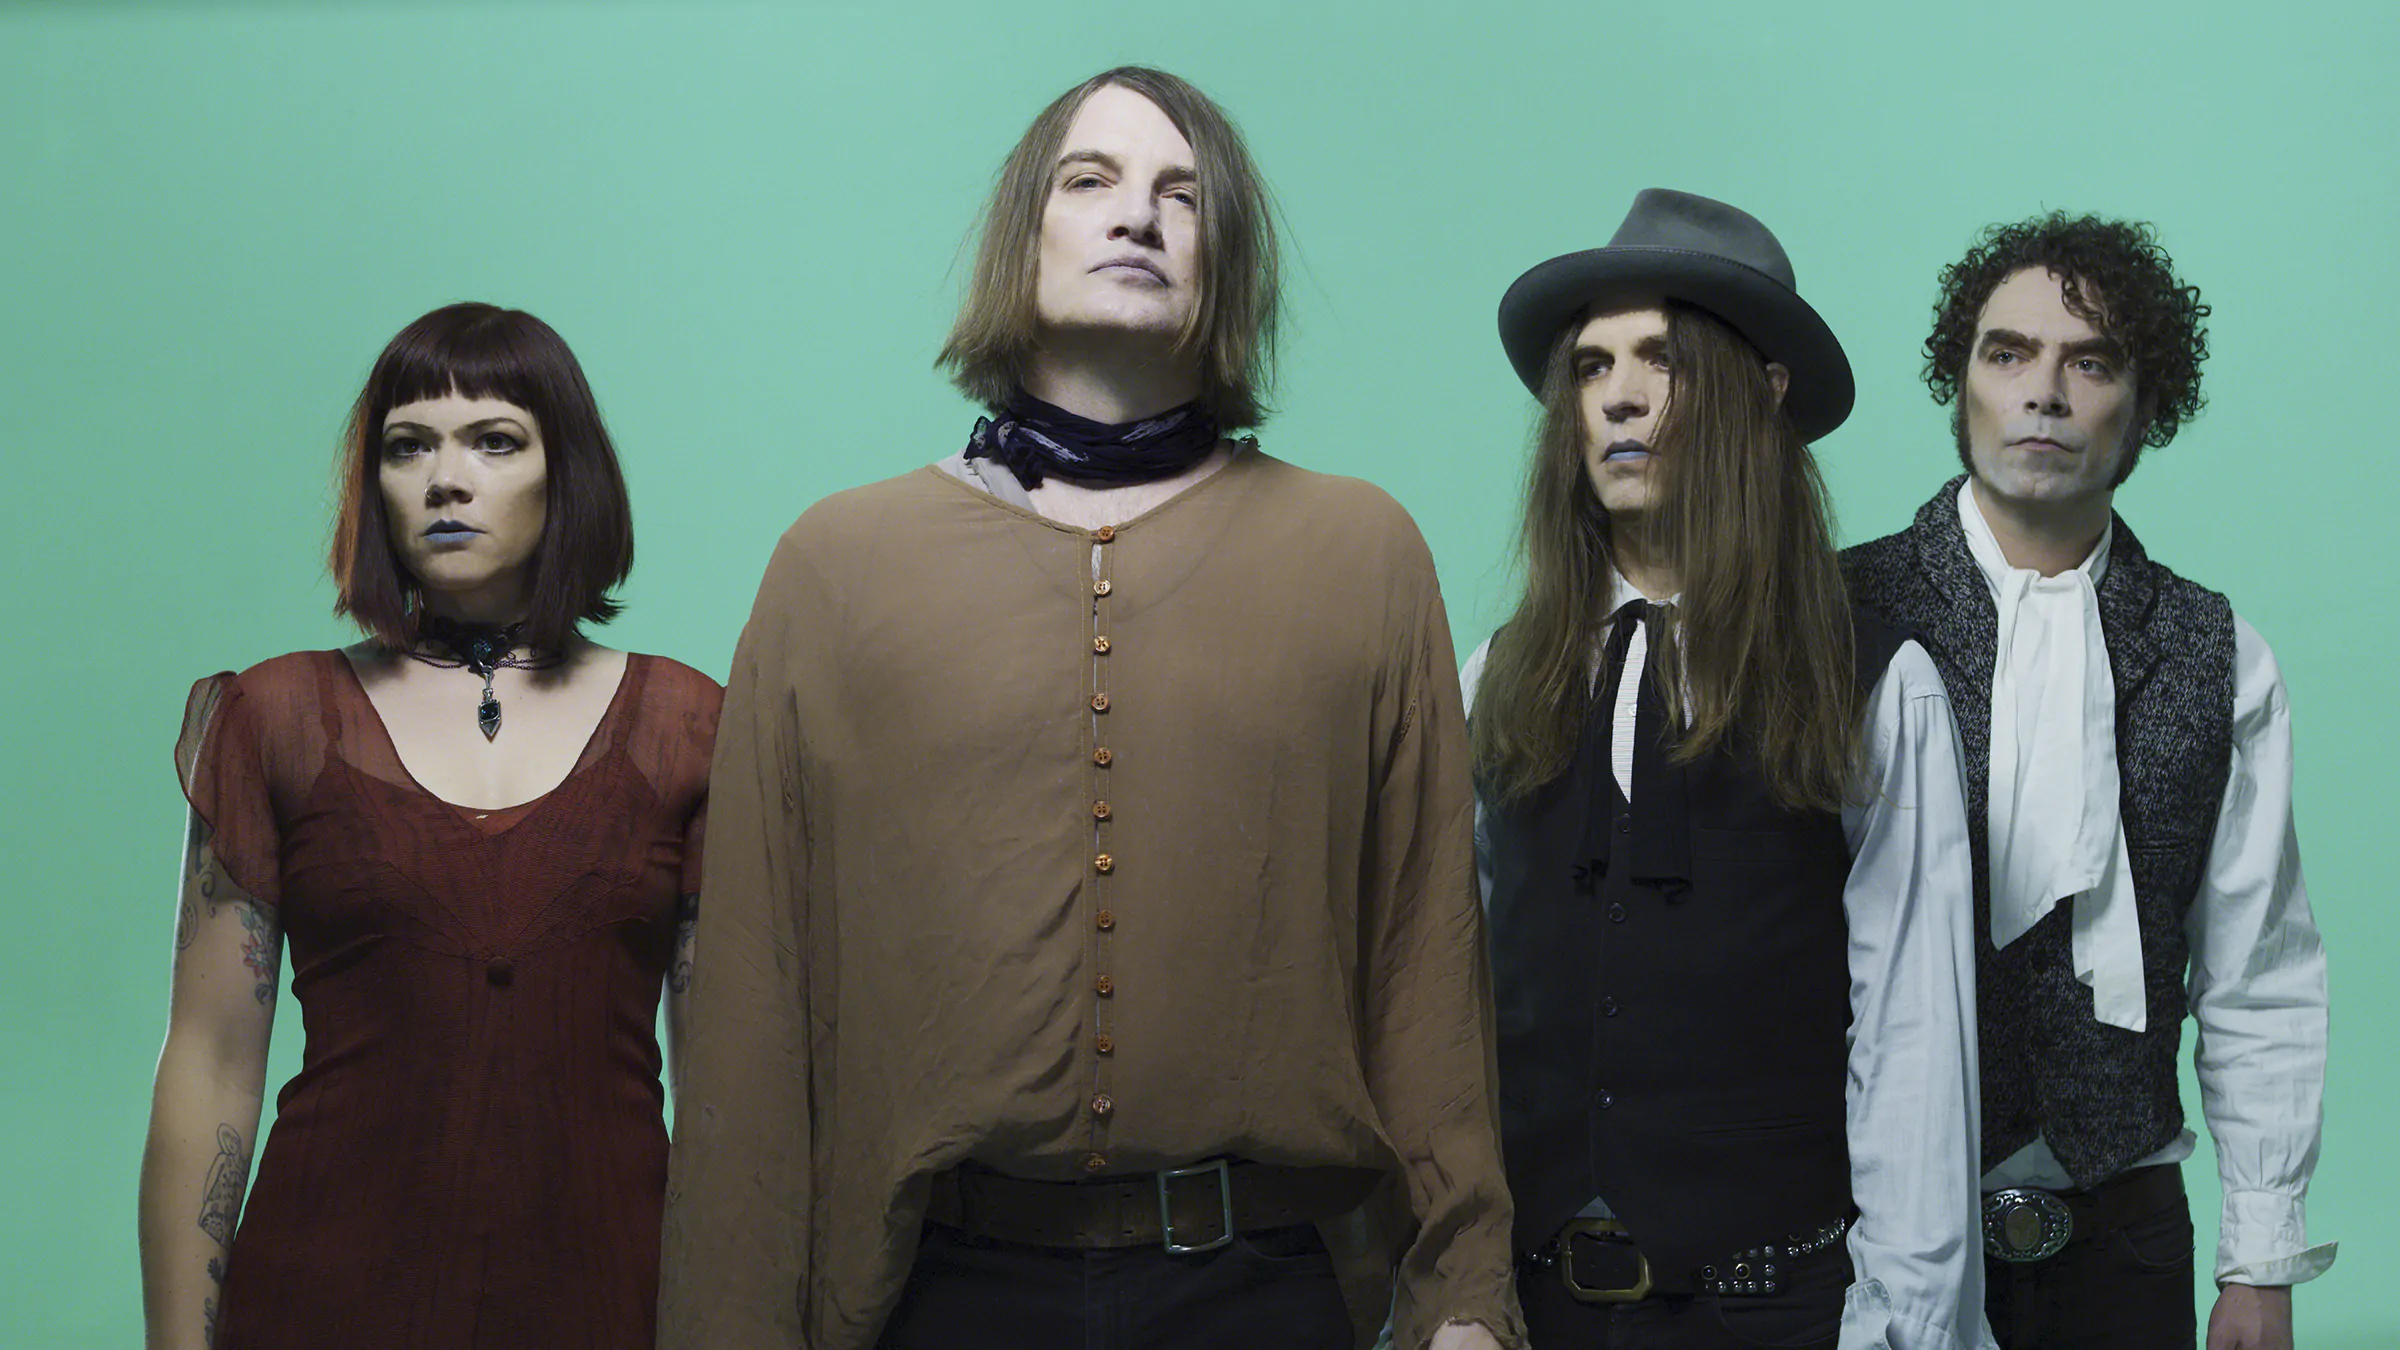 THE DANDY WARHOLS celebrates the 20th Anniversary of ’13 Tales From Urban Bohemia’ with streamed concert